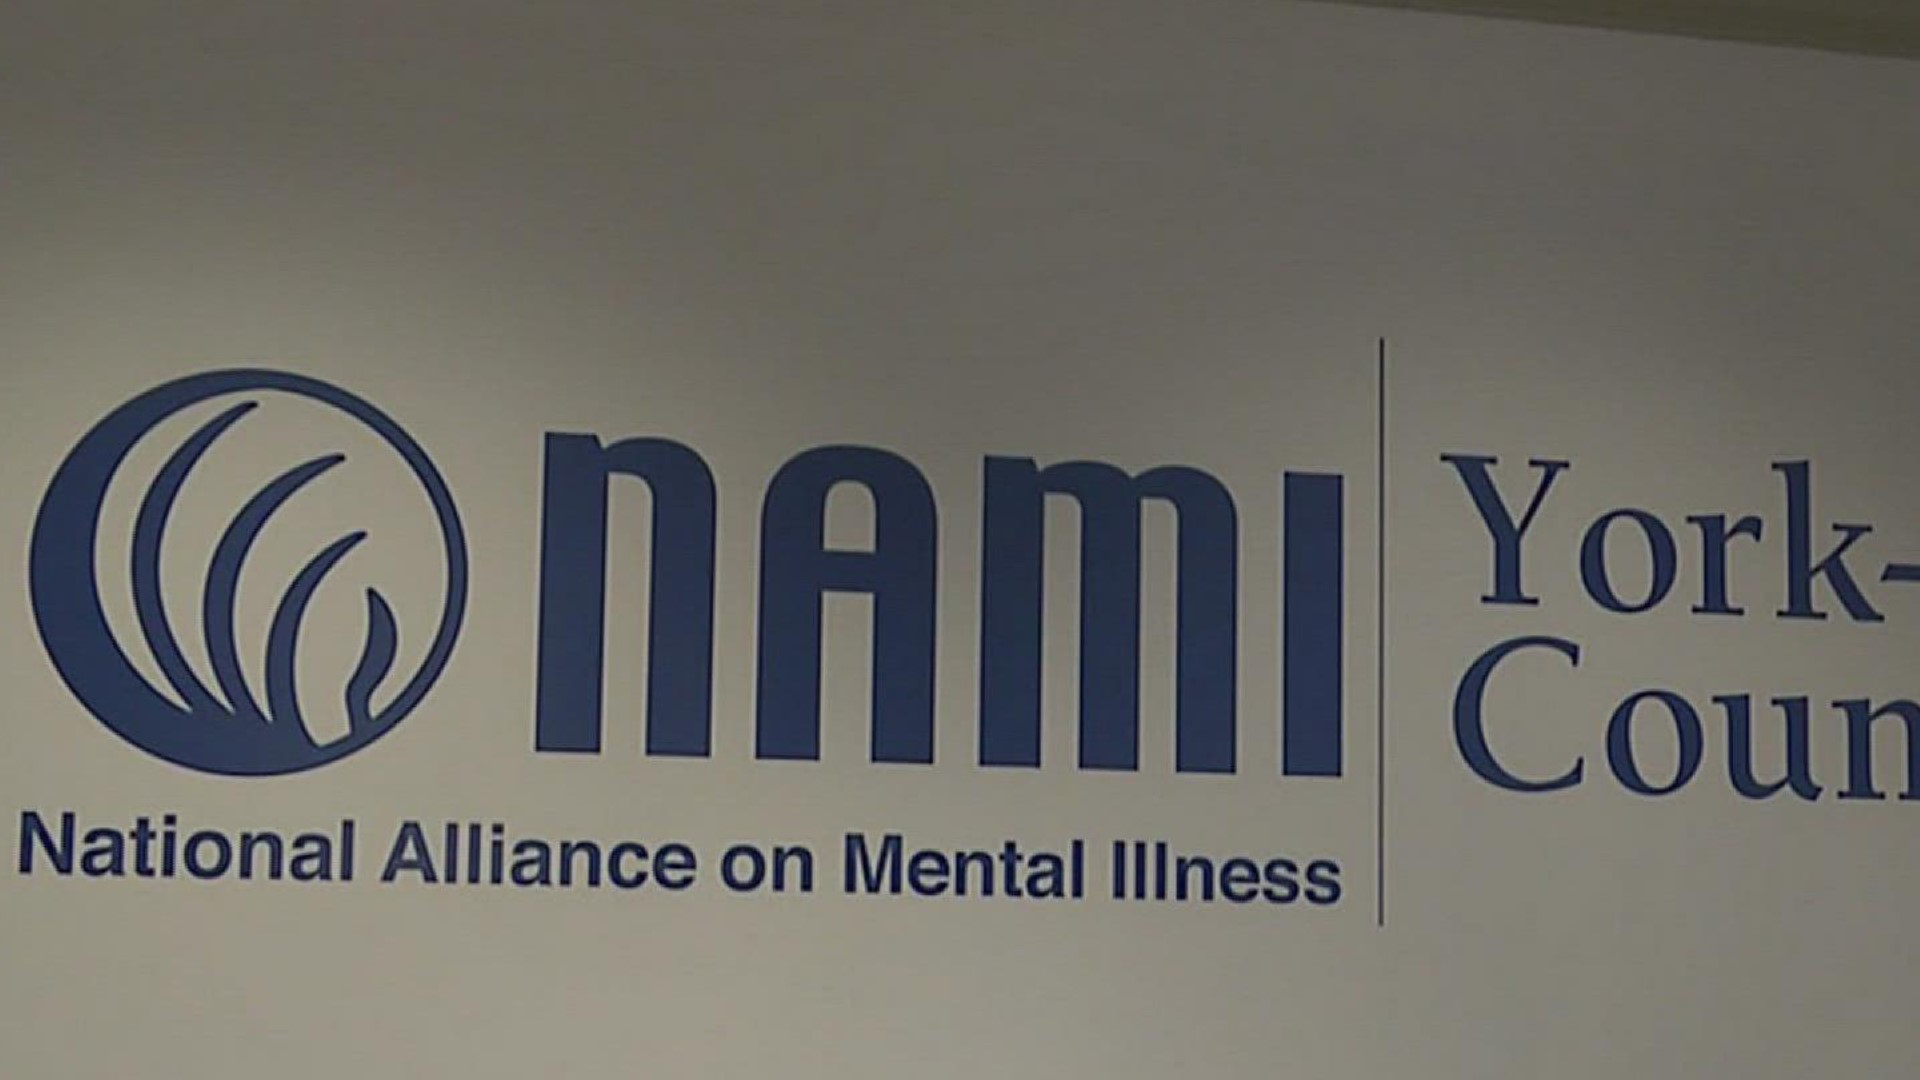 NAMI provides education, advocacy and support for those living with a mental health condition and their families.